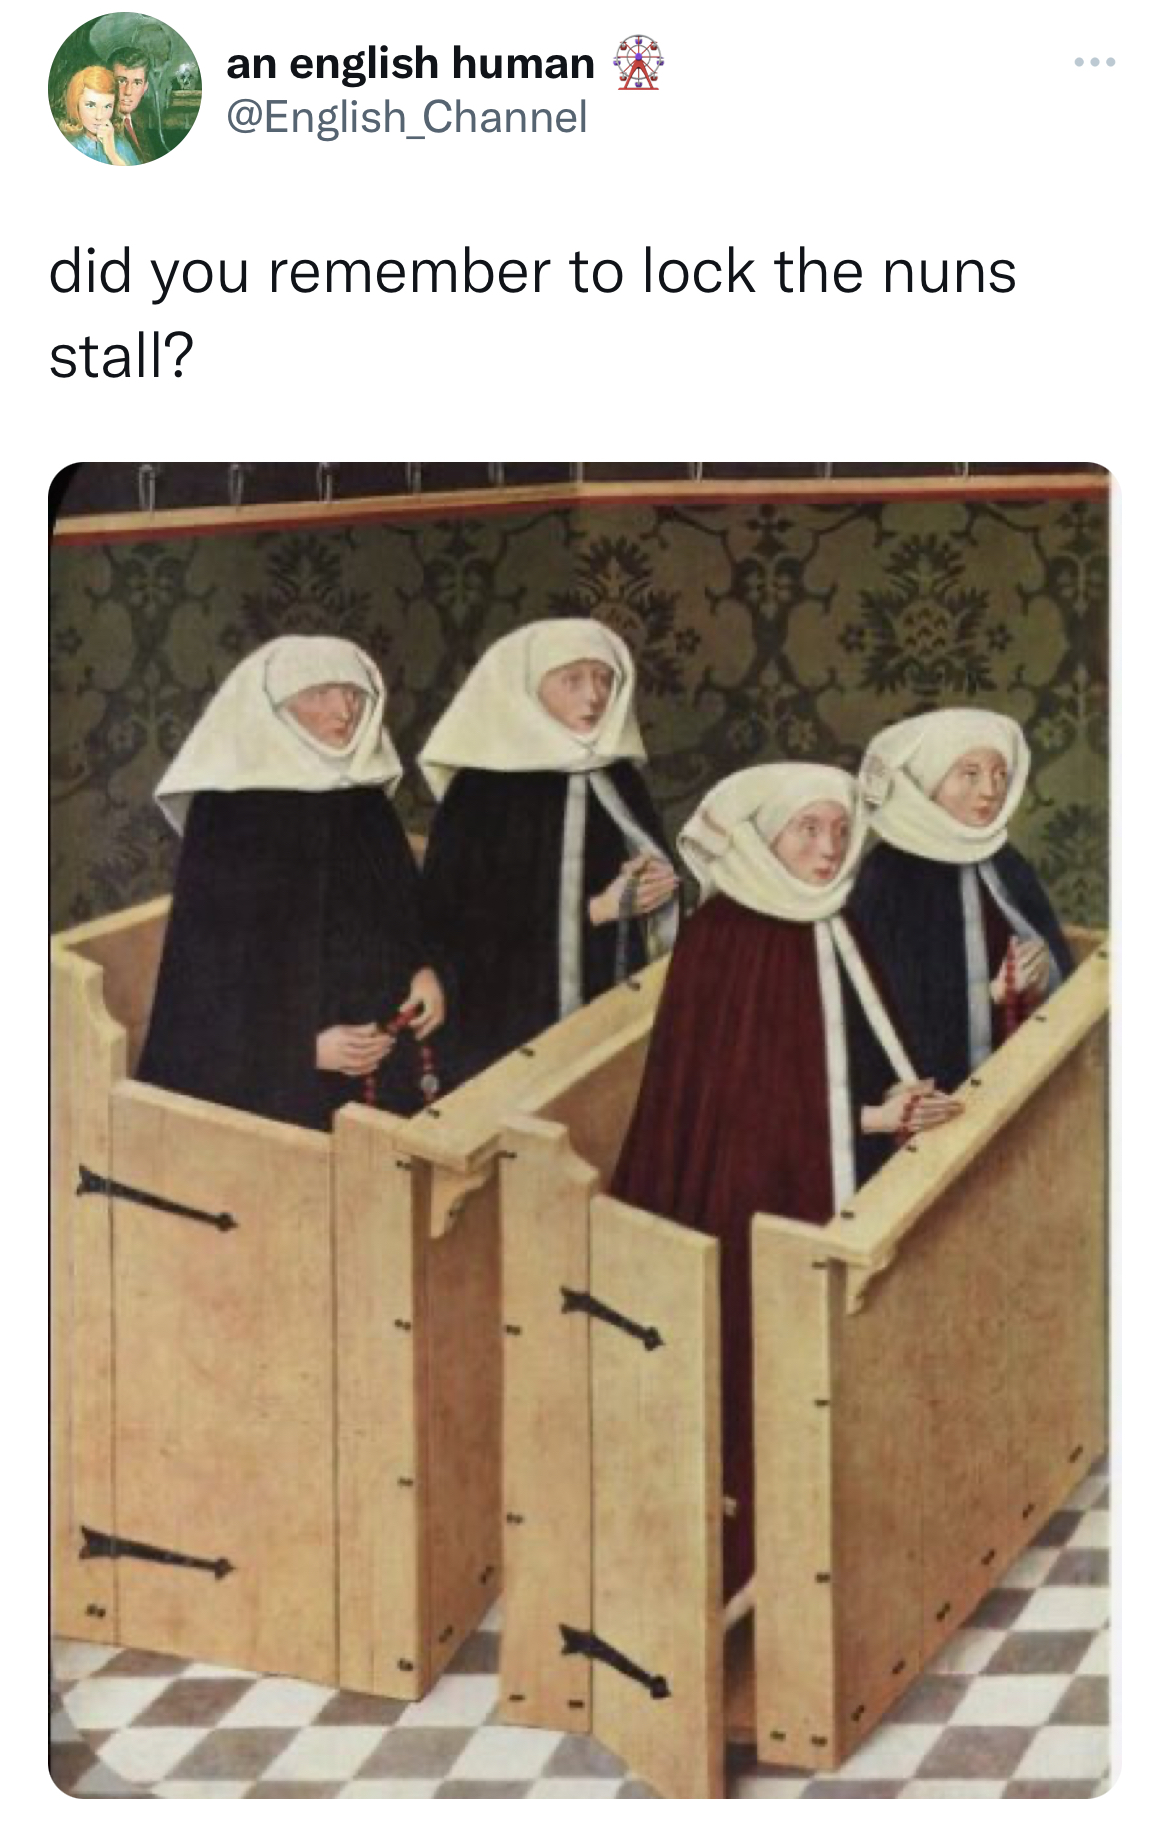 savage and funny tweets - design - an english human did you remember to lock the nuns stall?